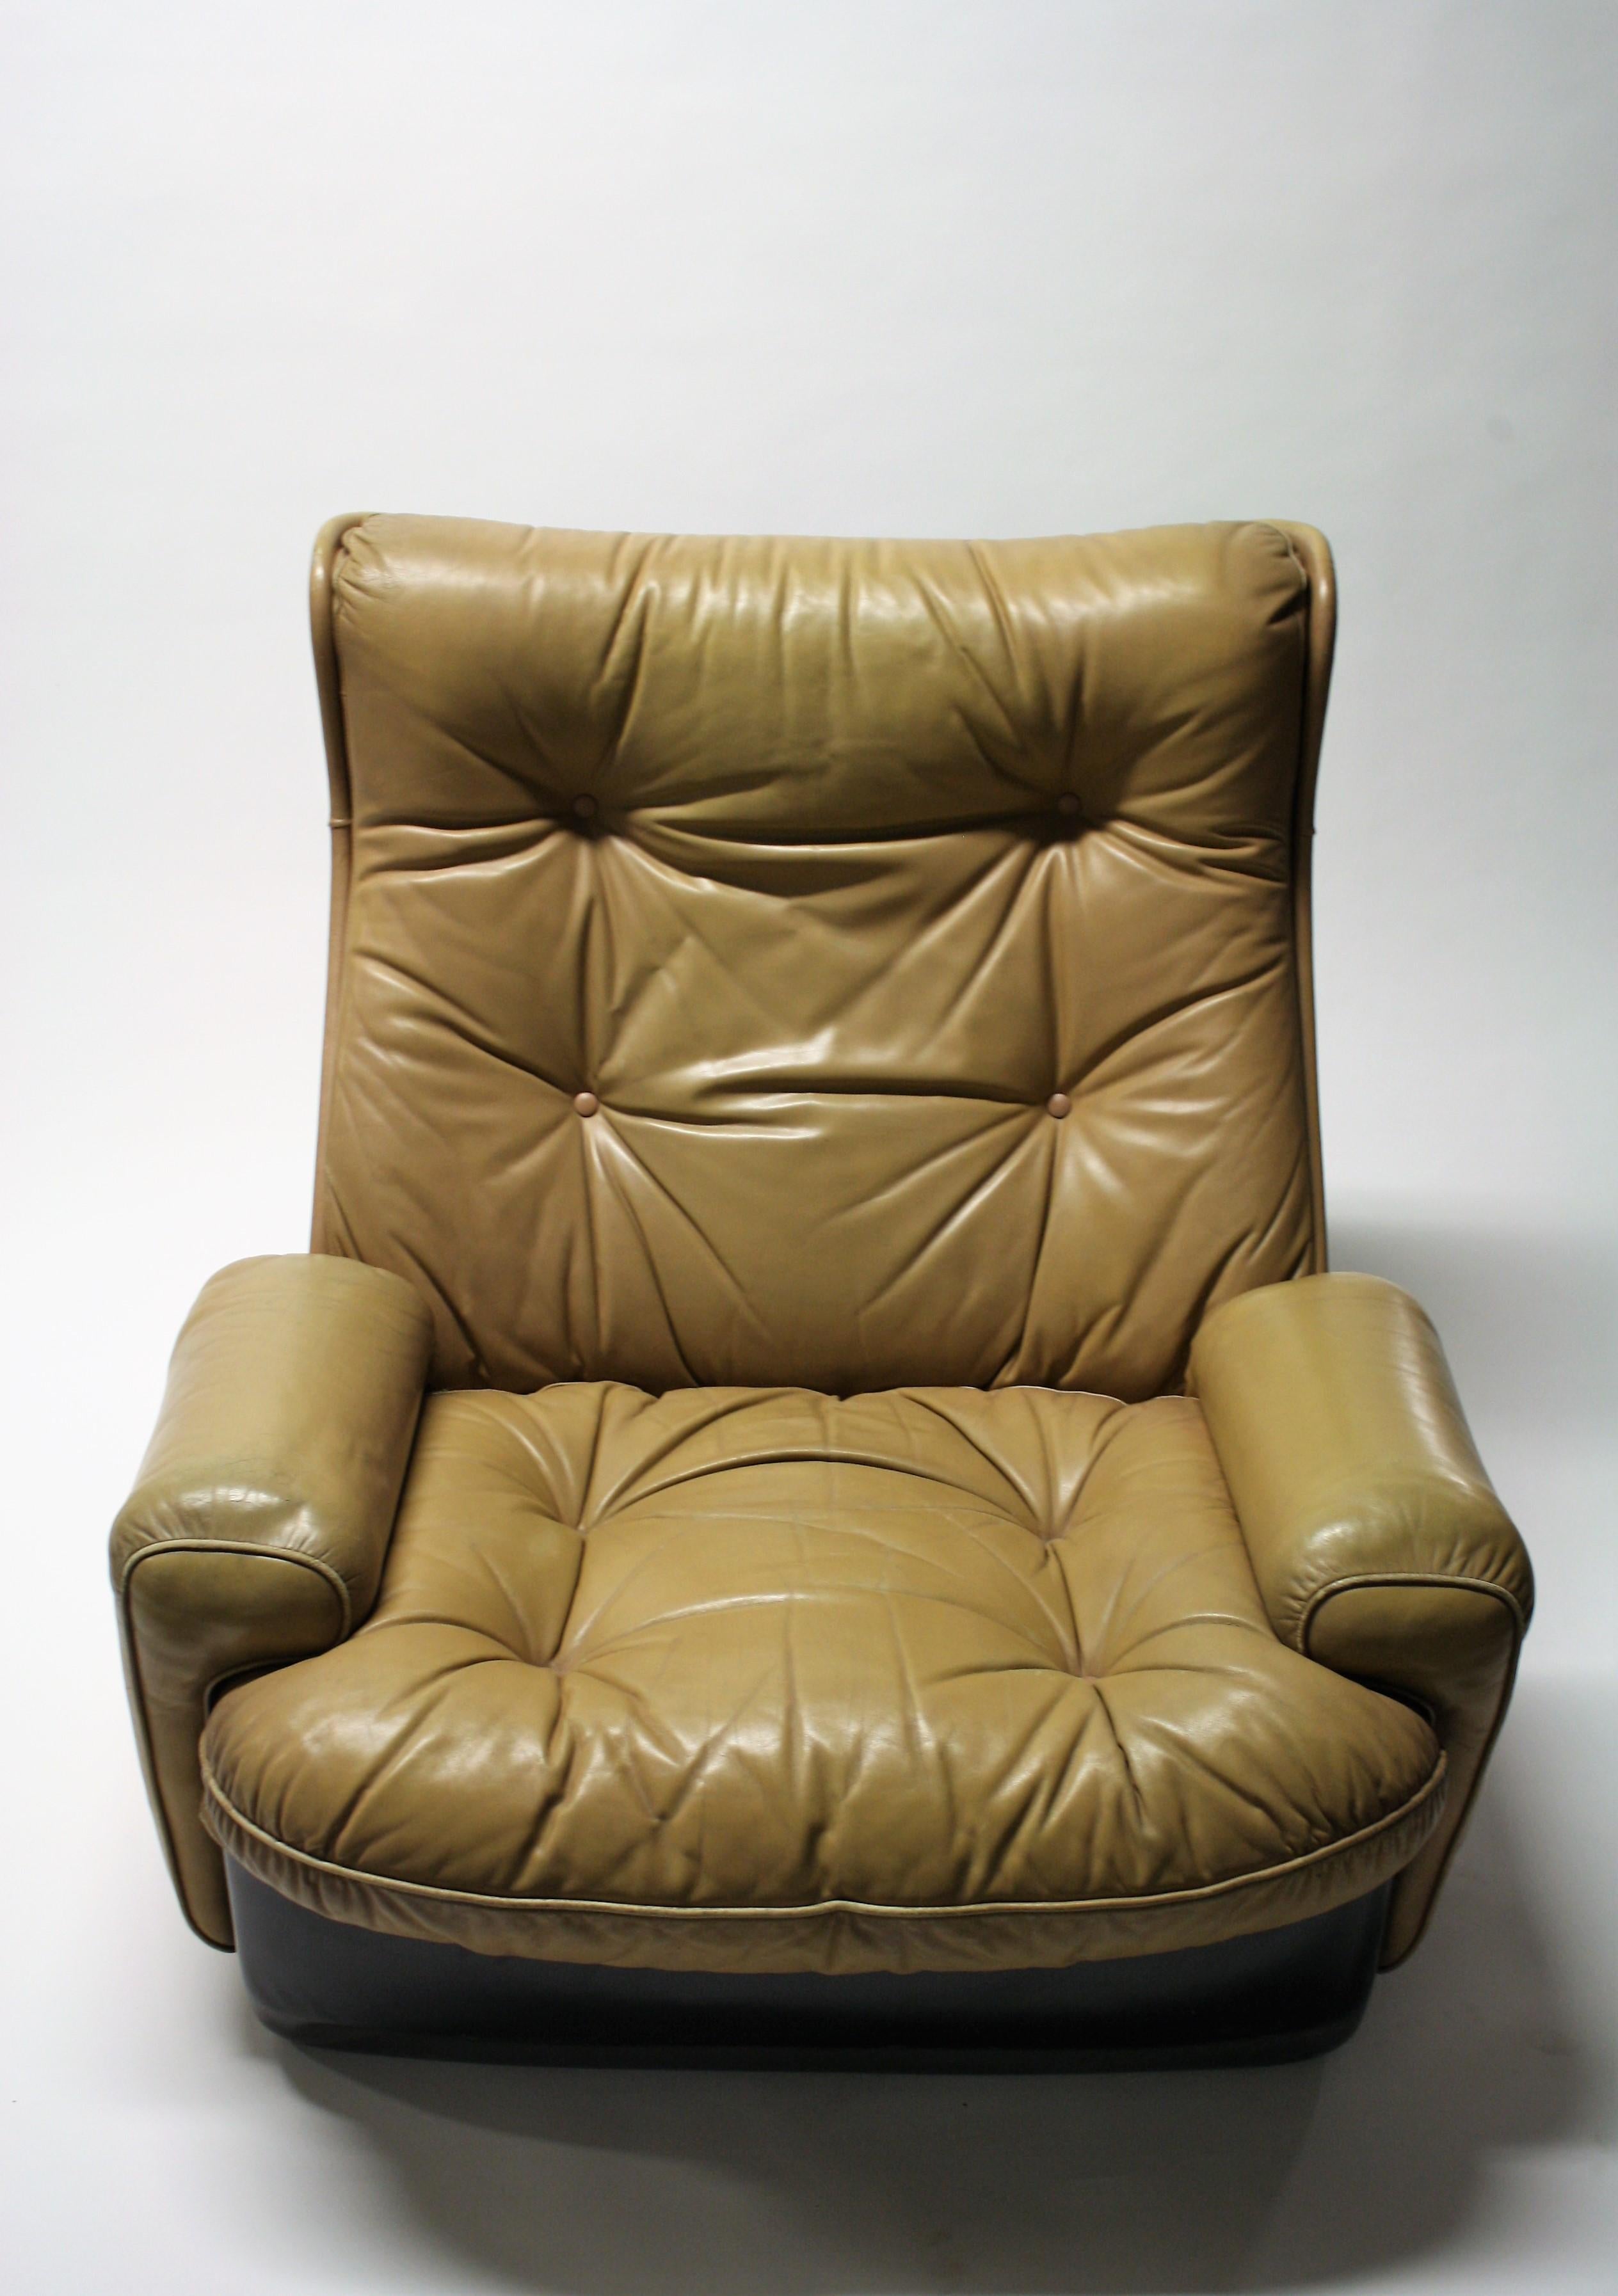 Space Age Vintage Leather Lounge Chair by Airborne International, 1970s